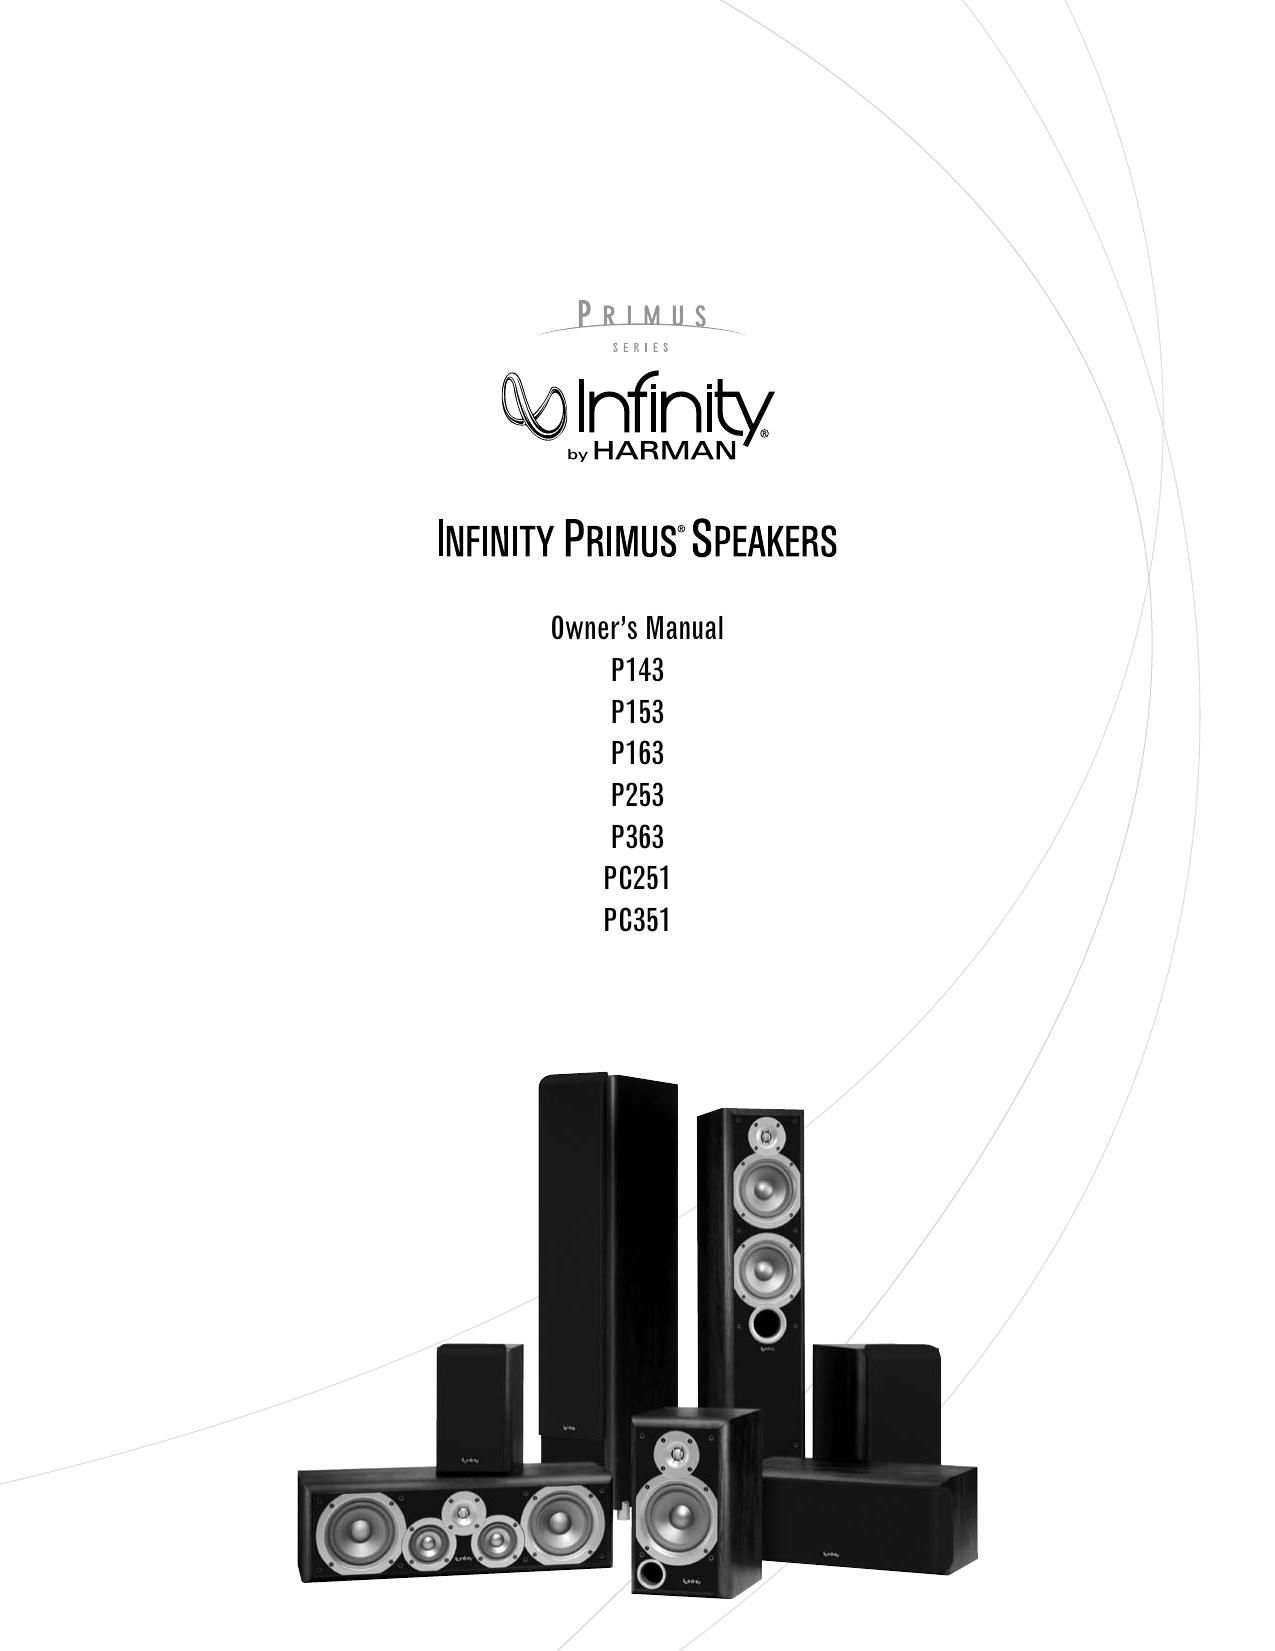 Infinity Primus PC 251 Owners Manual